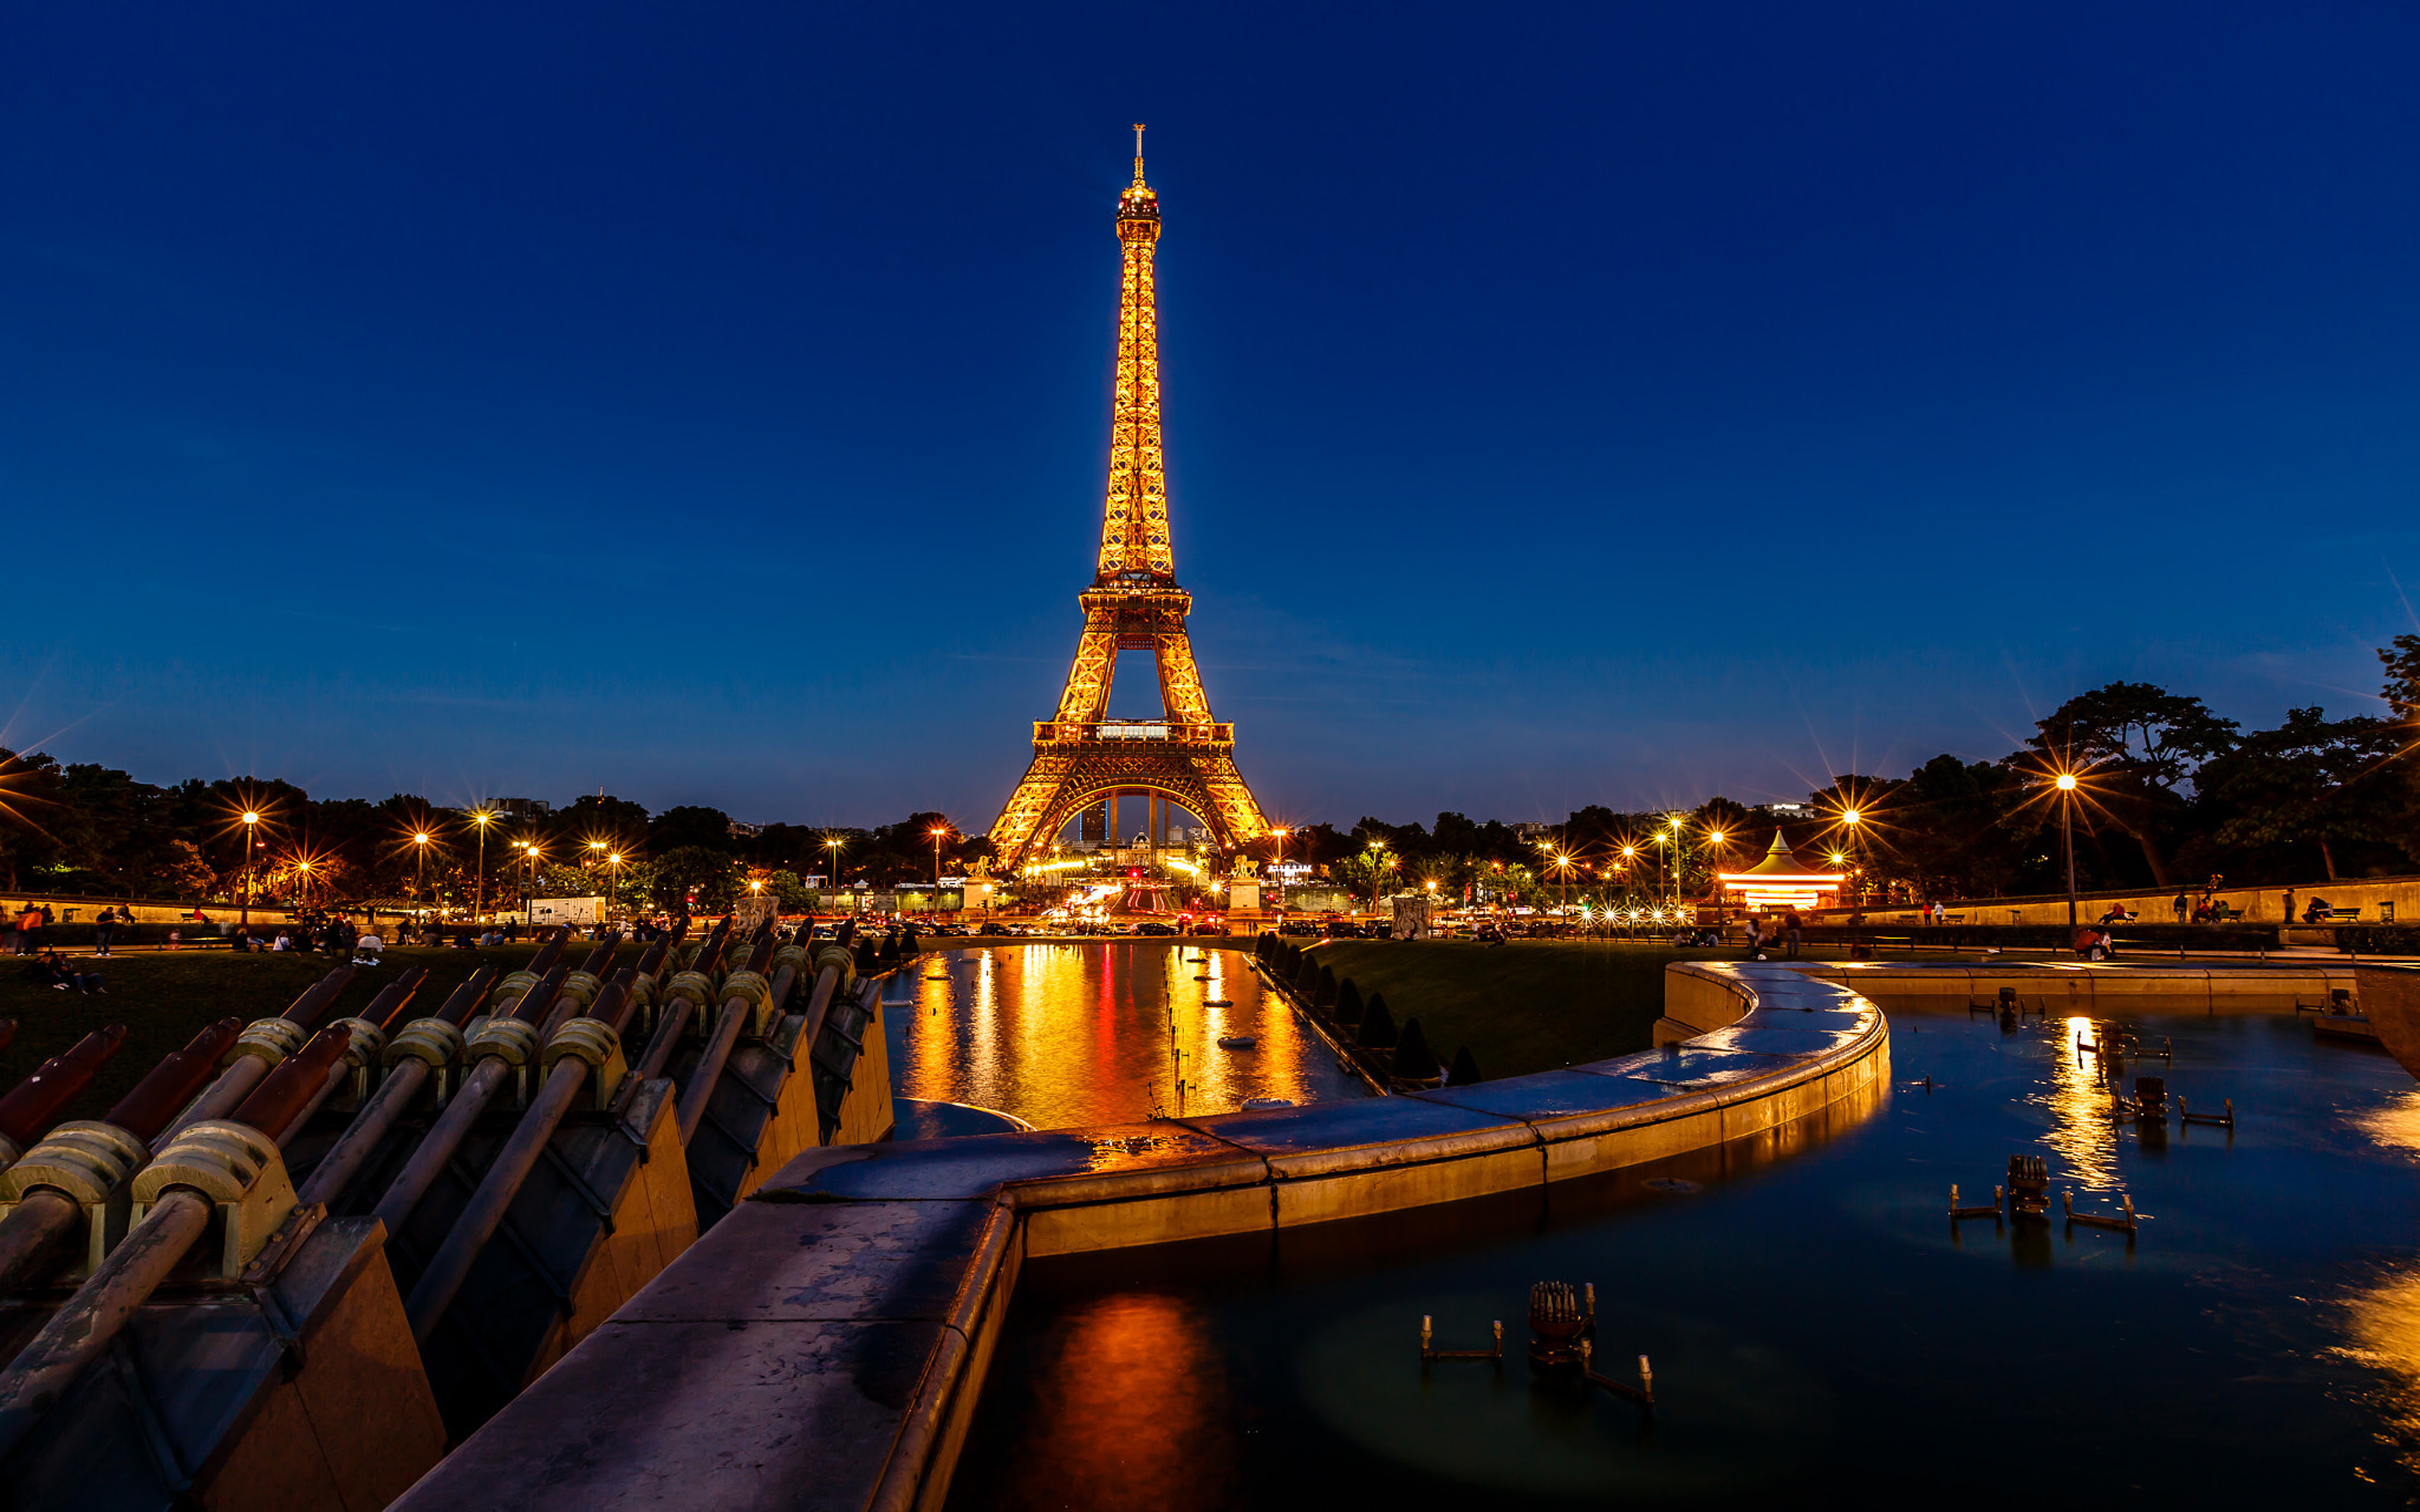 Trocadero Fountains In The Evening And Eiffel Tower Paris France Hd